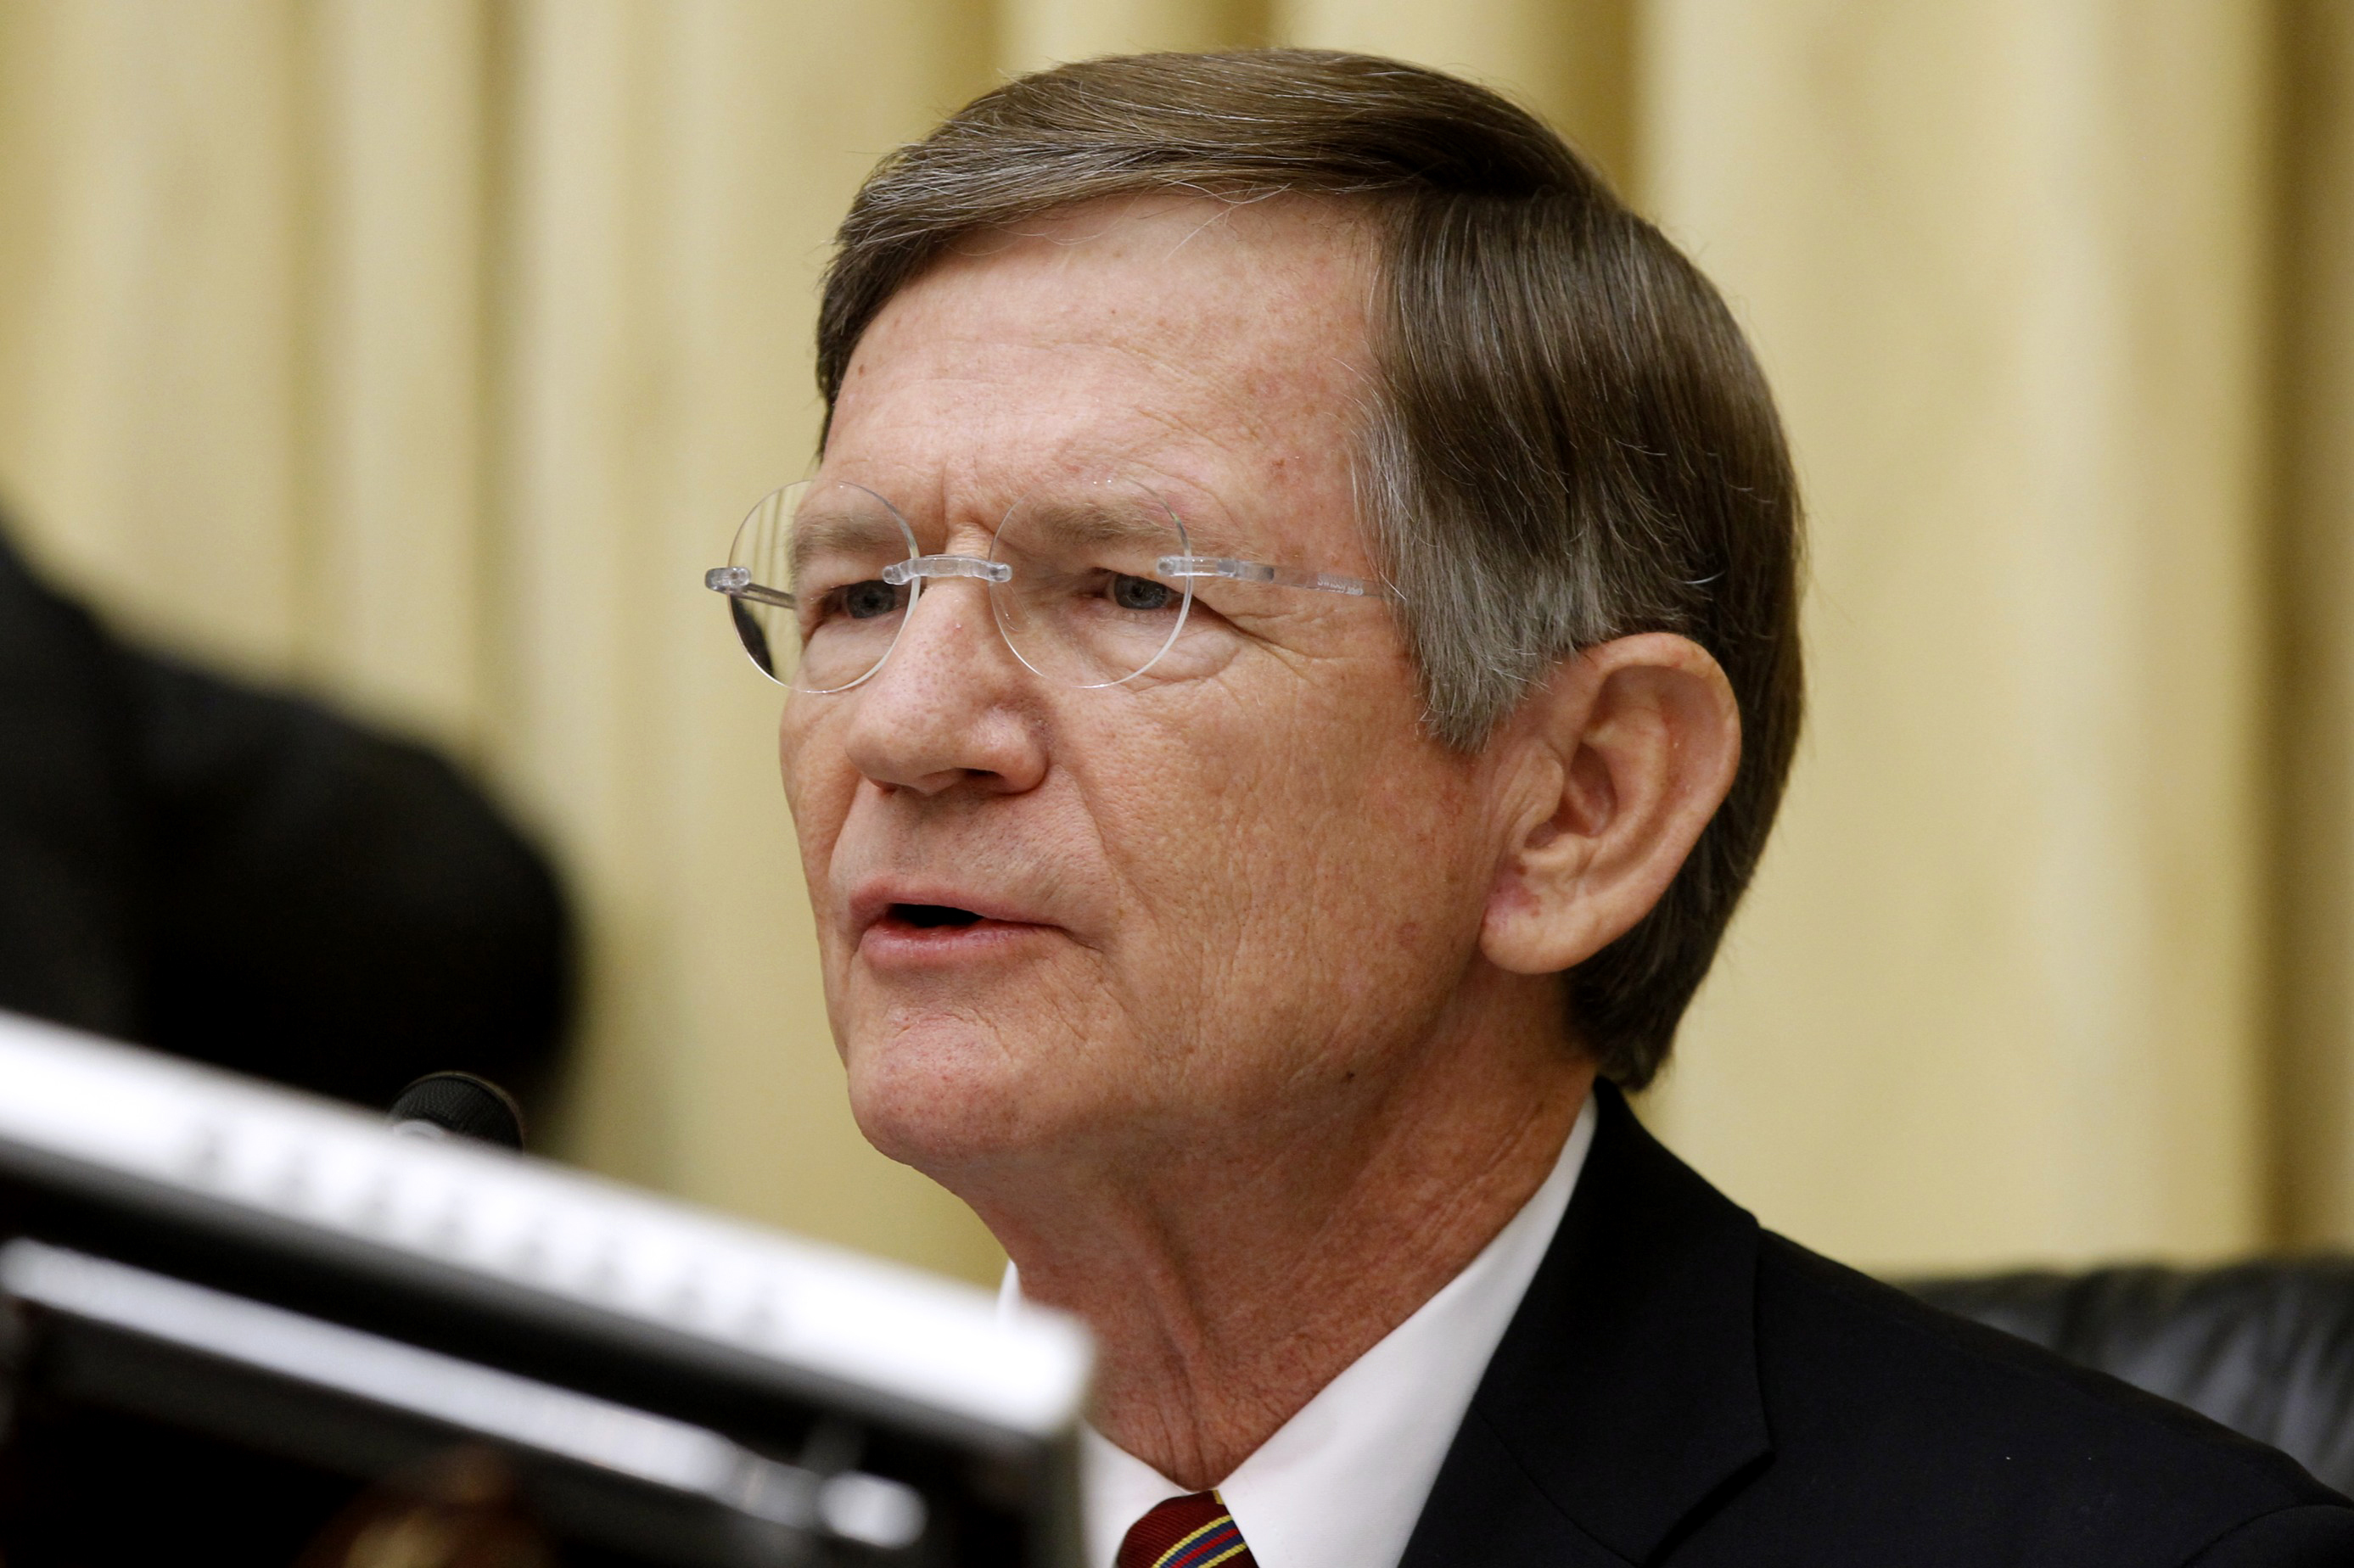 FILE - In this June 7, 2012 file photo,  House Science Committee Chairman Rep. Lamar Smith, R-Texas speaks on Capitol Hill in Washington. Escalating a political fight over global warming, Smith issued subpoenas Wednesday, July 13, 2016, to two Democratic state attorneys general, seeking records about their investigation into whether Exxon Mobil misled investors about global warming. (AP Photo/Charles Dharapak, File)